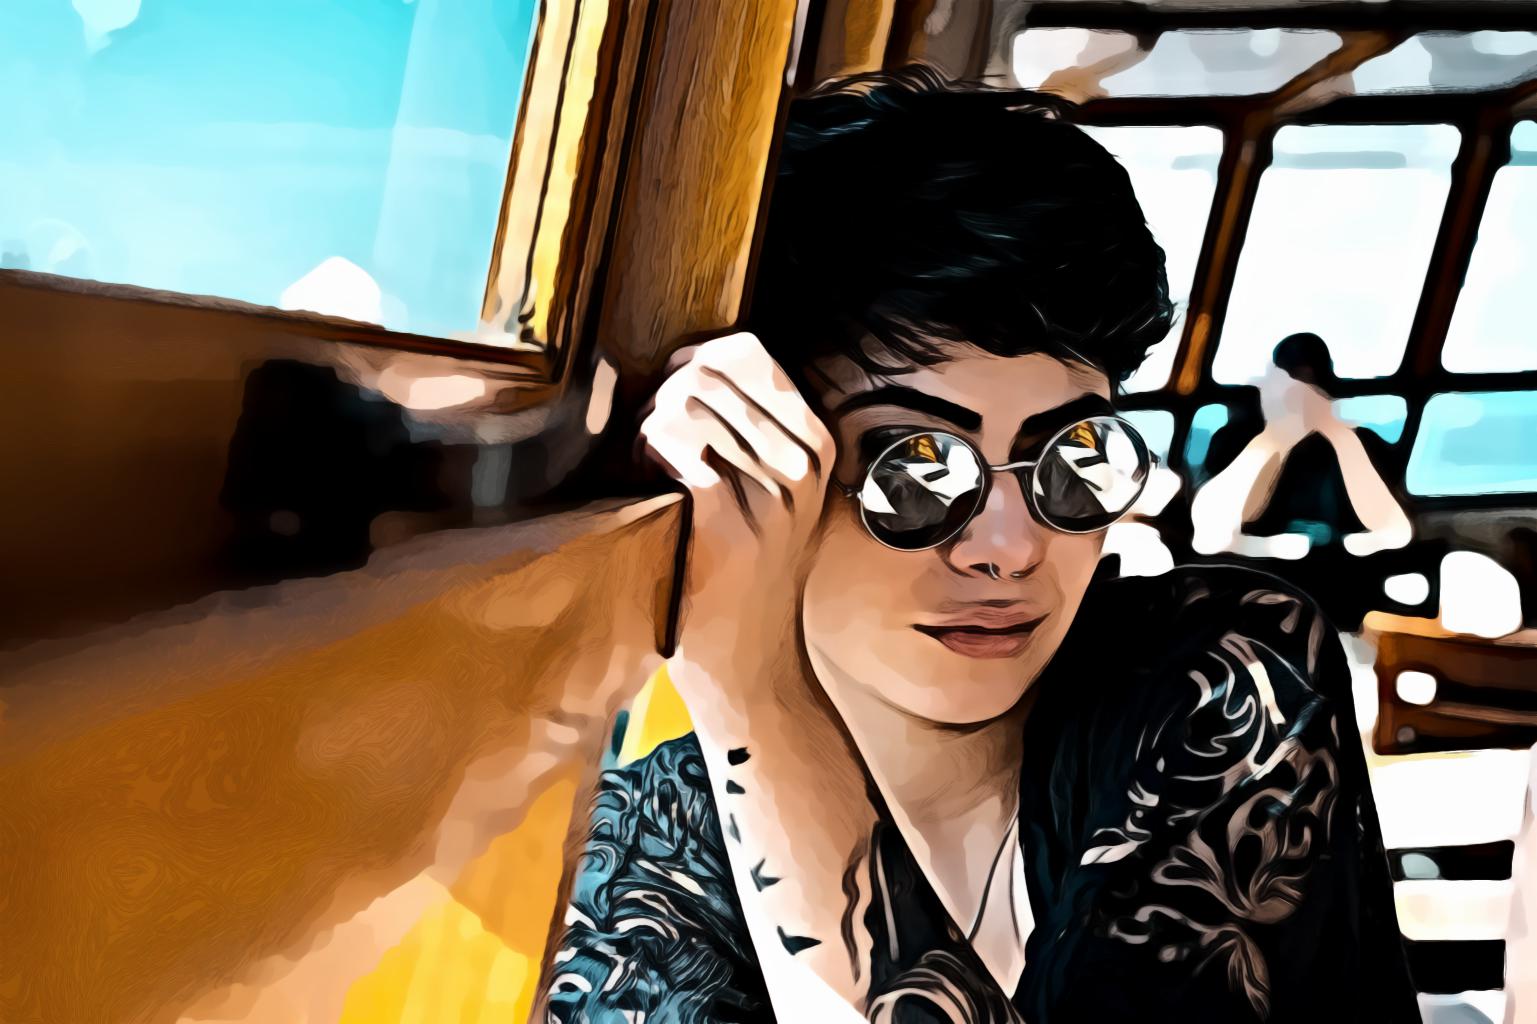 Shallow focus portrait of woman in black top wearing sunglasses